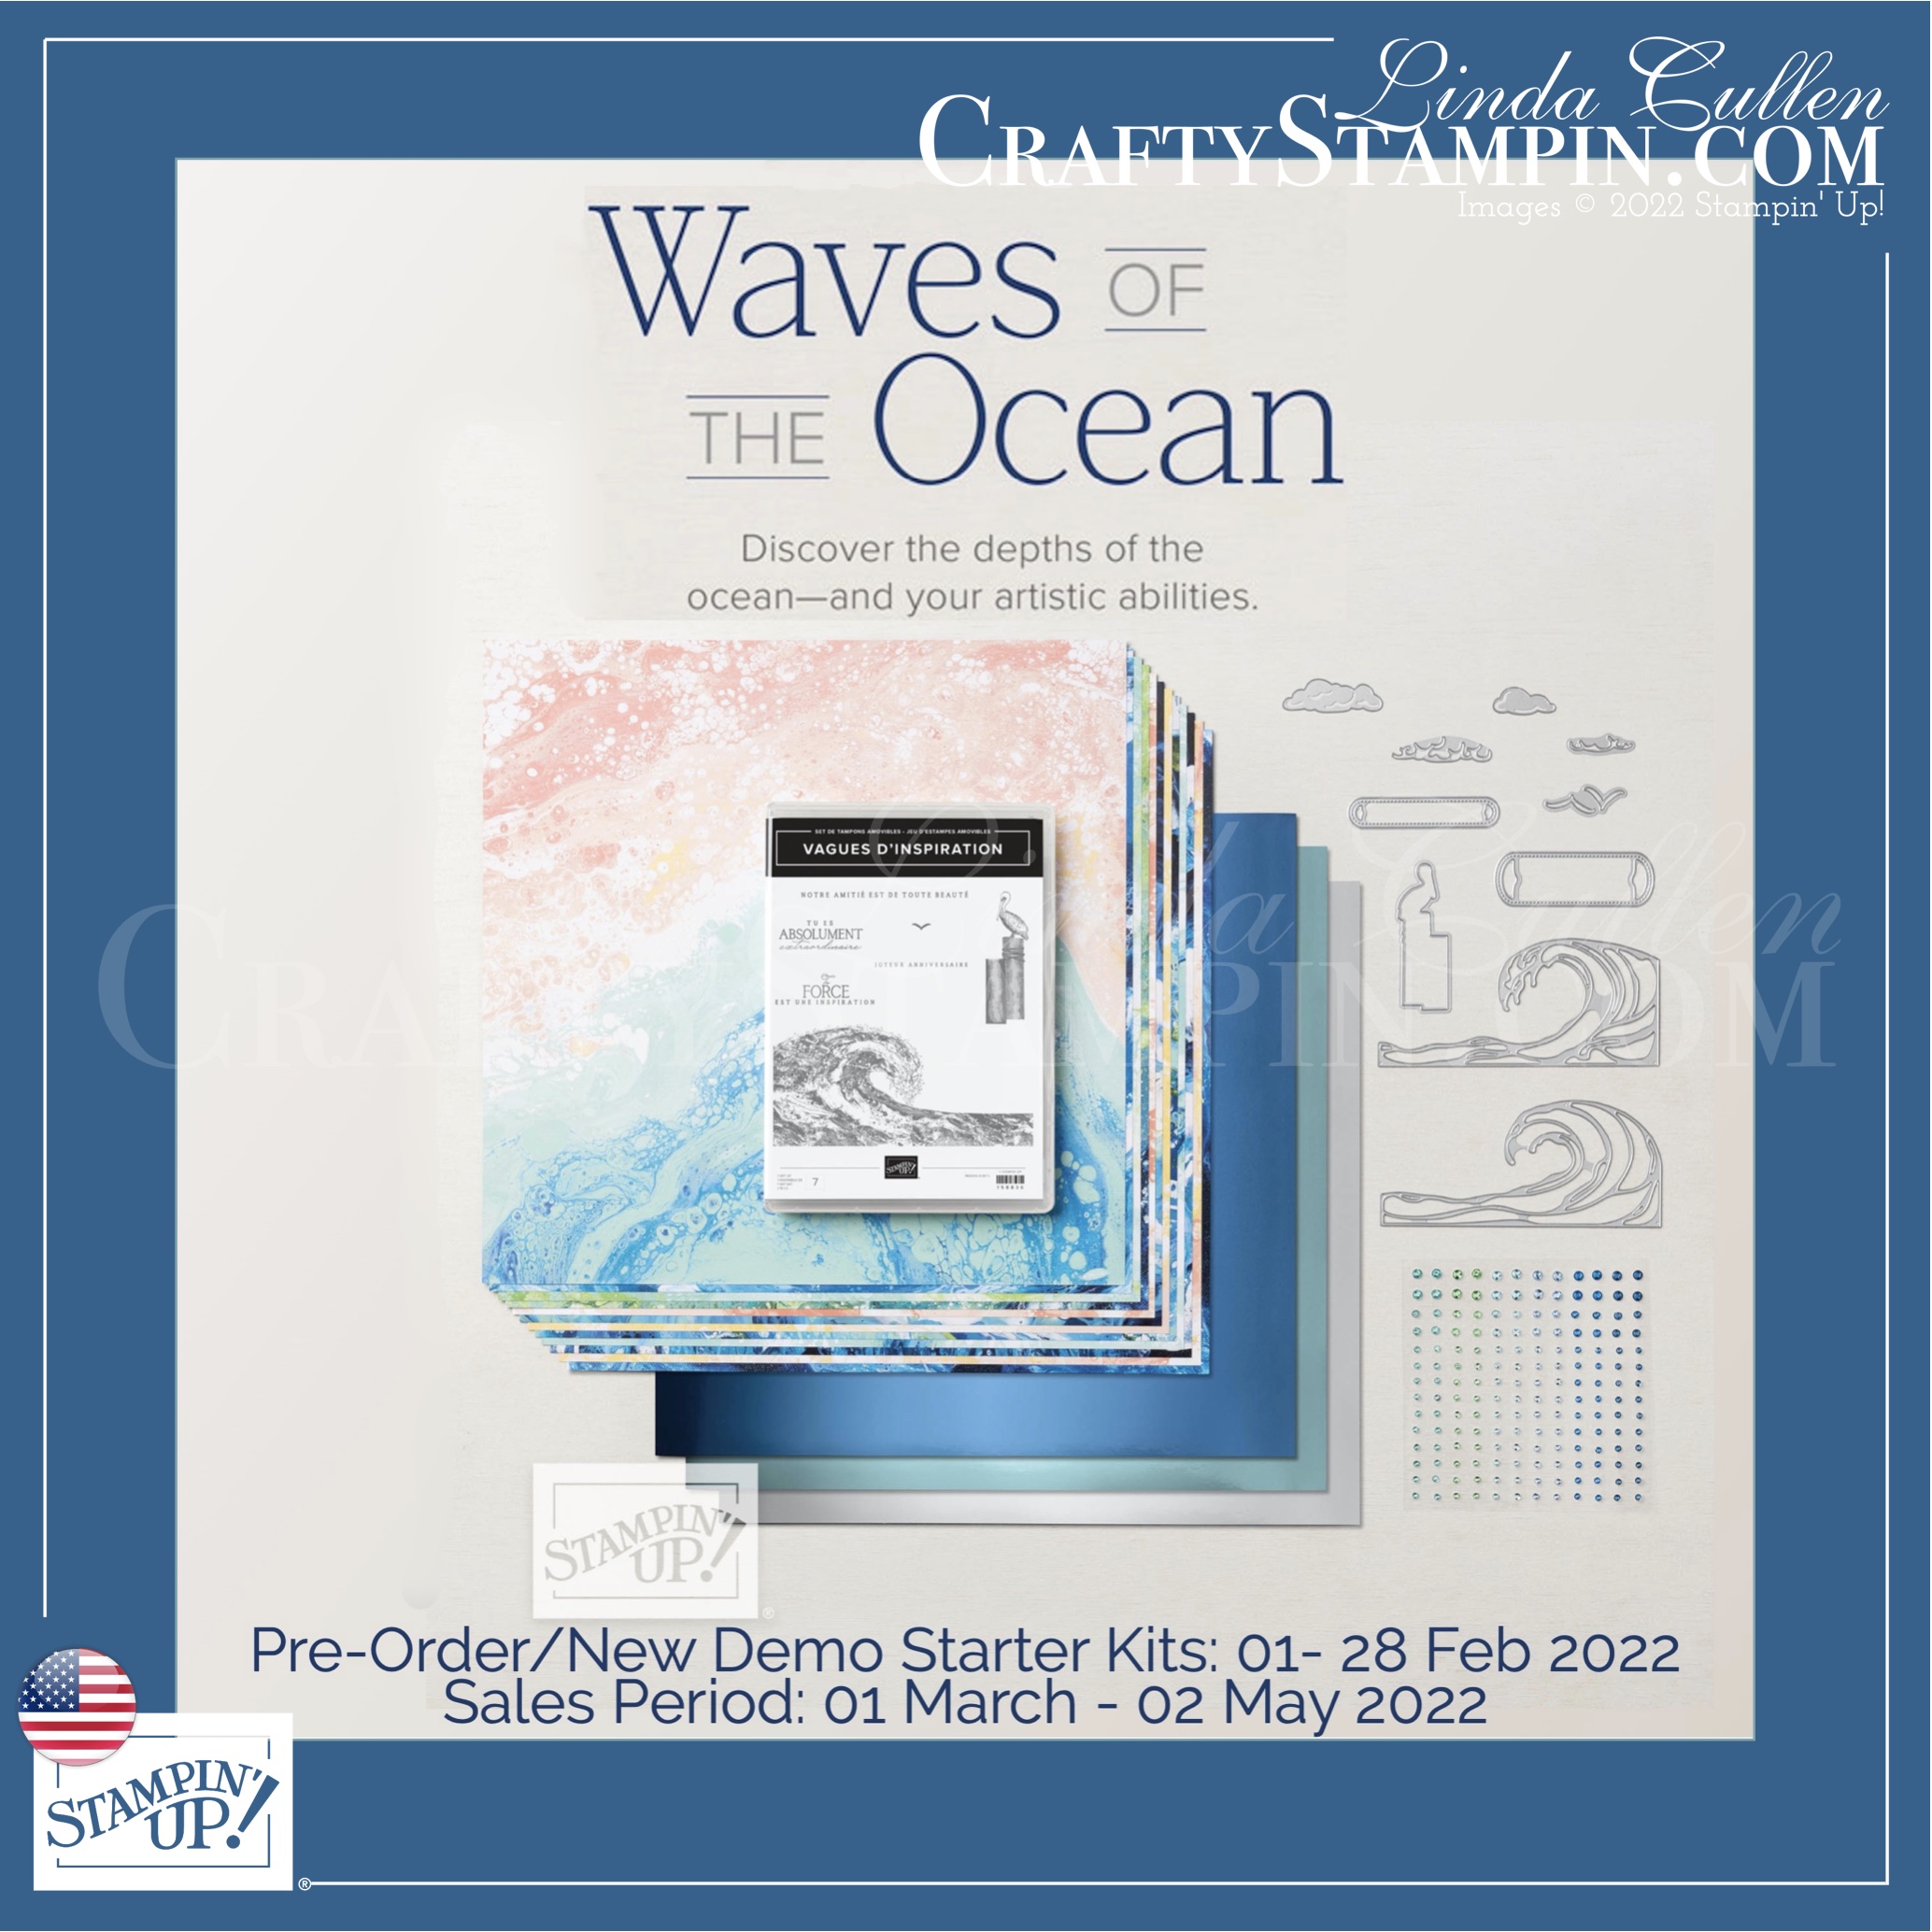 Waves of the Ocean | Join Stampin’ Up! | Frequently Asked Questions about becoming a Stampin’ Up! Demonstrator | Join the Craft Stampin’ Crew | Stampin Up Demonstrator Linda Cullen | Crafty Stampin’ | Purchase Stampin’ Up! Product | FAQ about Paper Pumpkin Wave of the Ocean Collection 161797 | Waves of Inspiration Bundle 158841 | Waves of Inspiration Stamp Set 158833 | Waves Dies 158840 | Waves of the Ocean 12” x 12” Designer Series Paper 159982 | Blue Foil 12 “ x 12” Specialty Paper 159983 | Rhinestone Waves Basic Jewels 159396